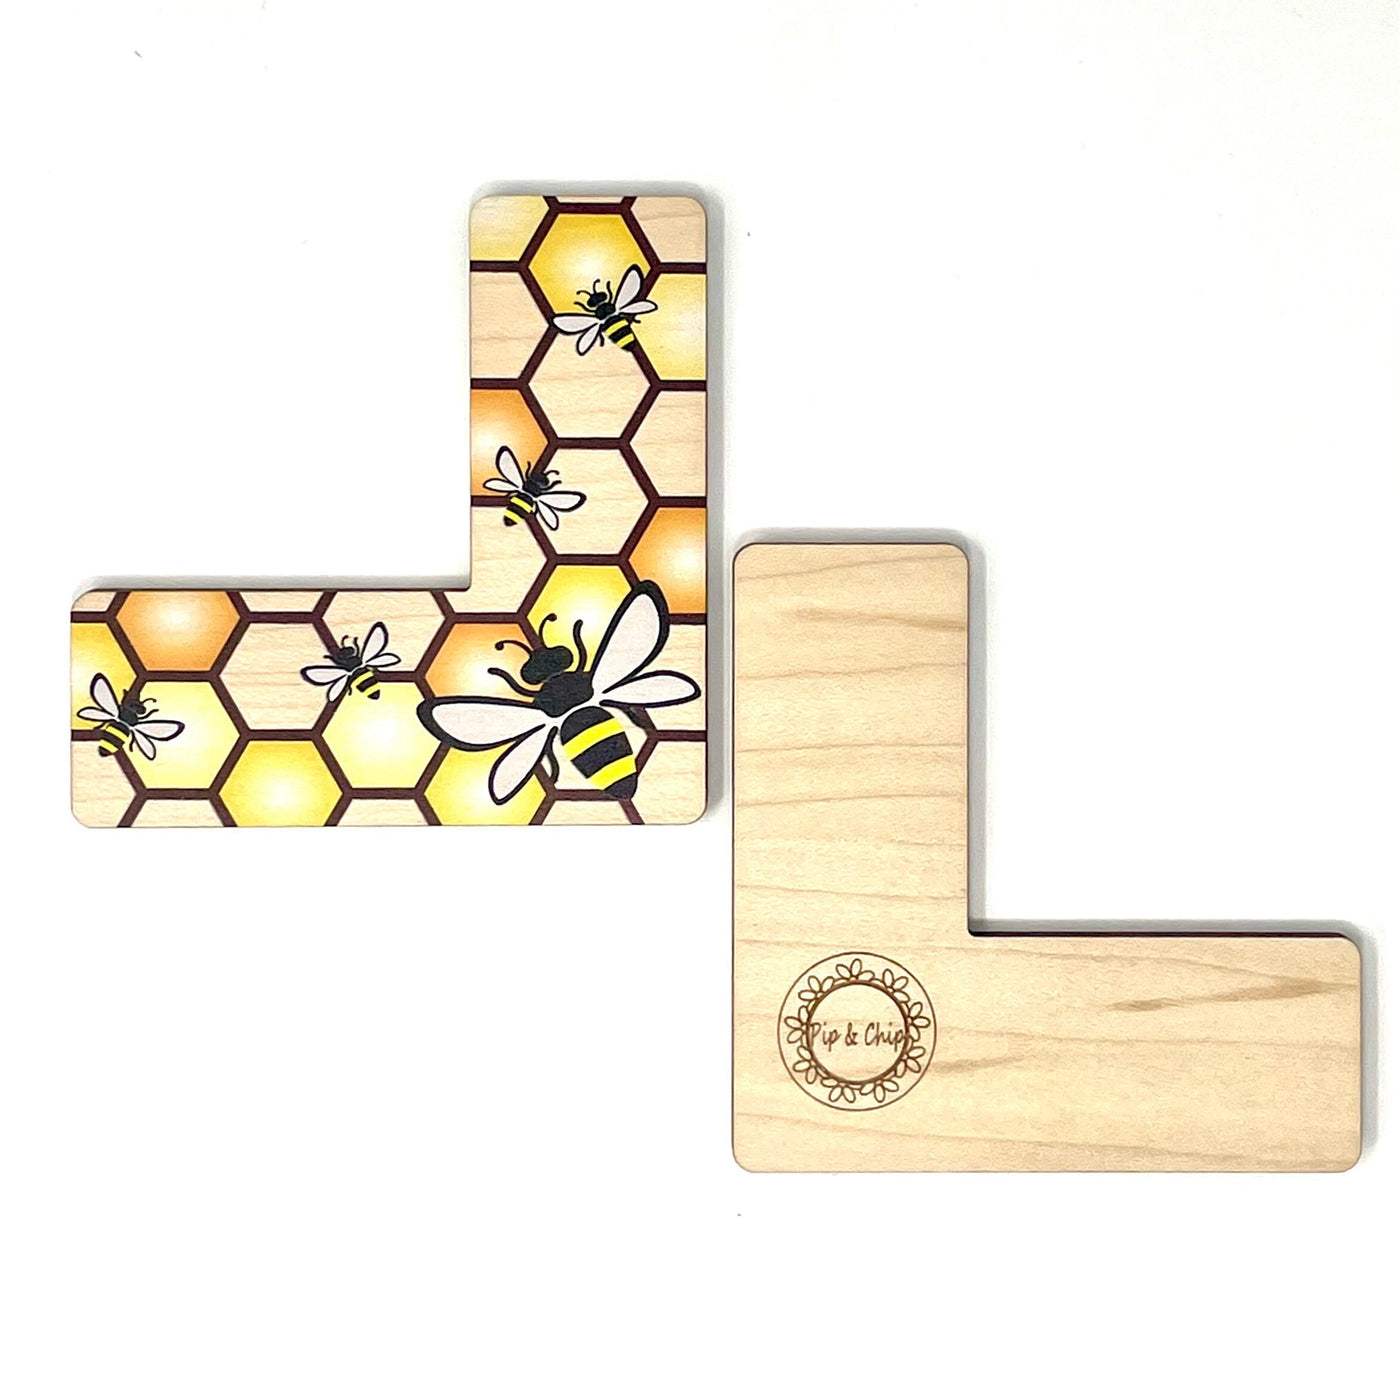 Bee magnetic pattern marker - cross Stitch and embroidery tool